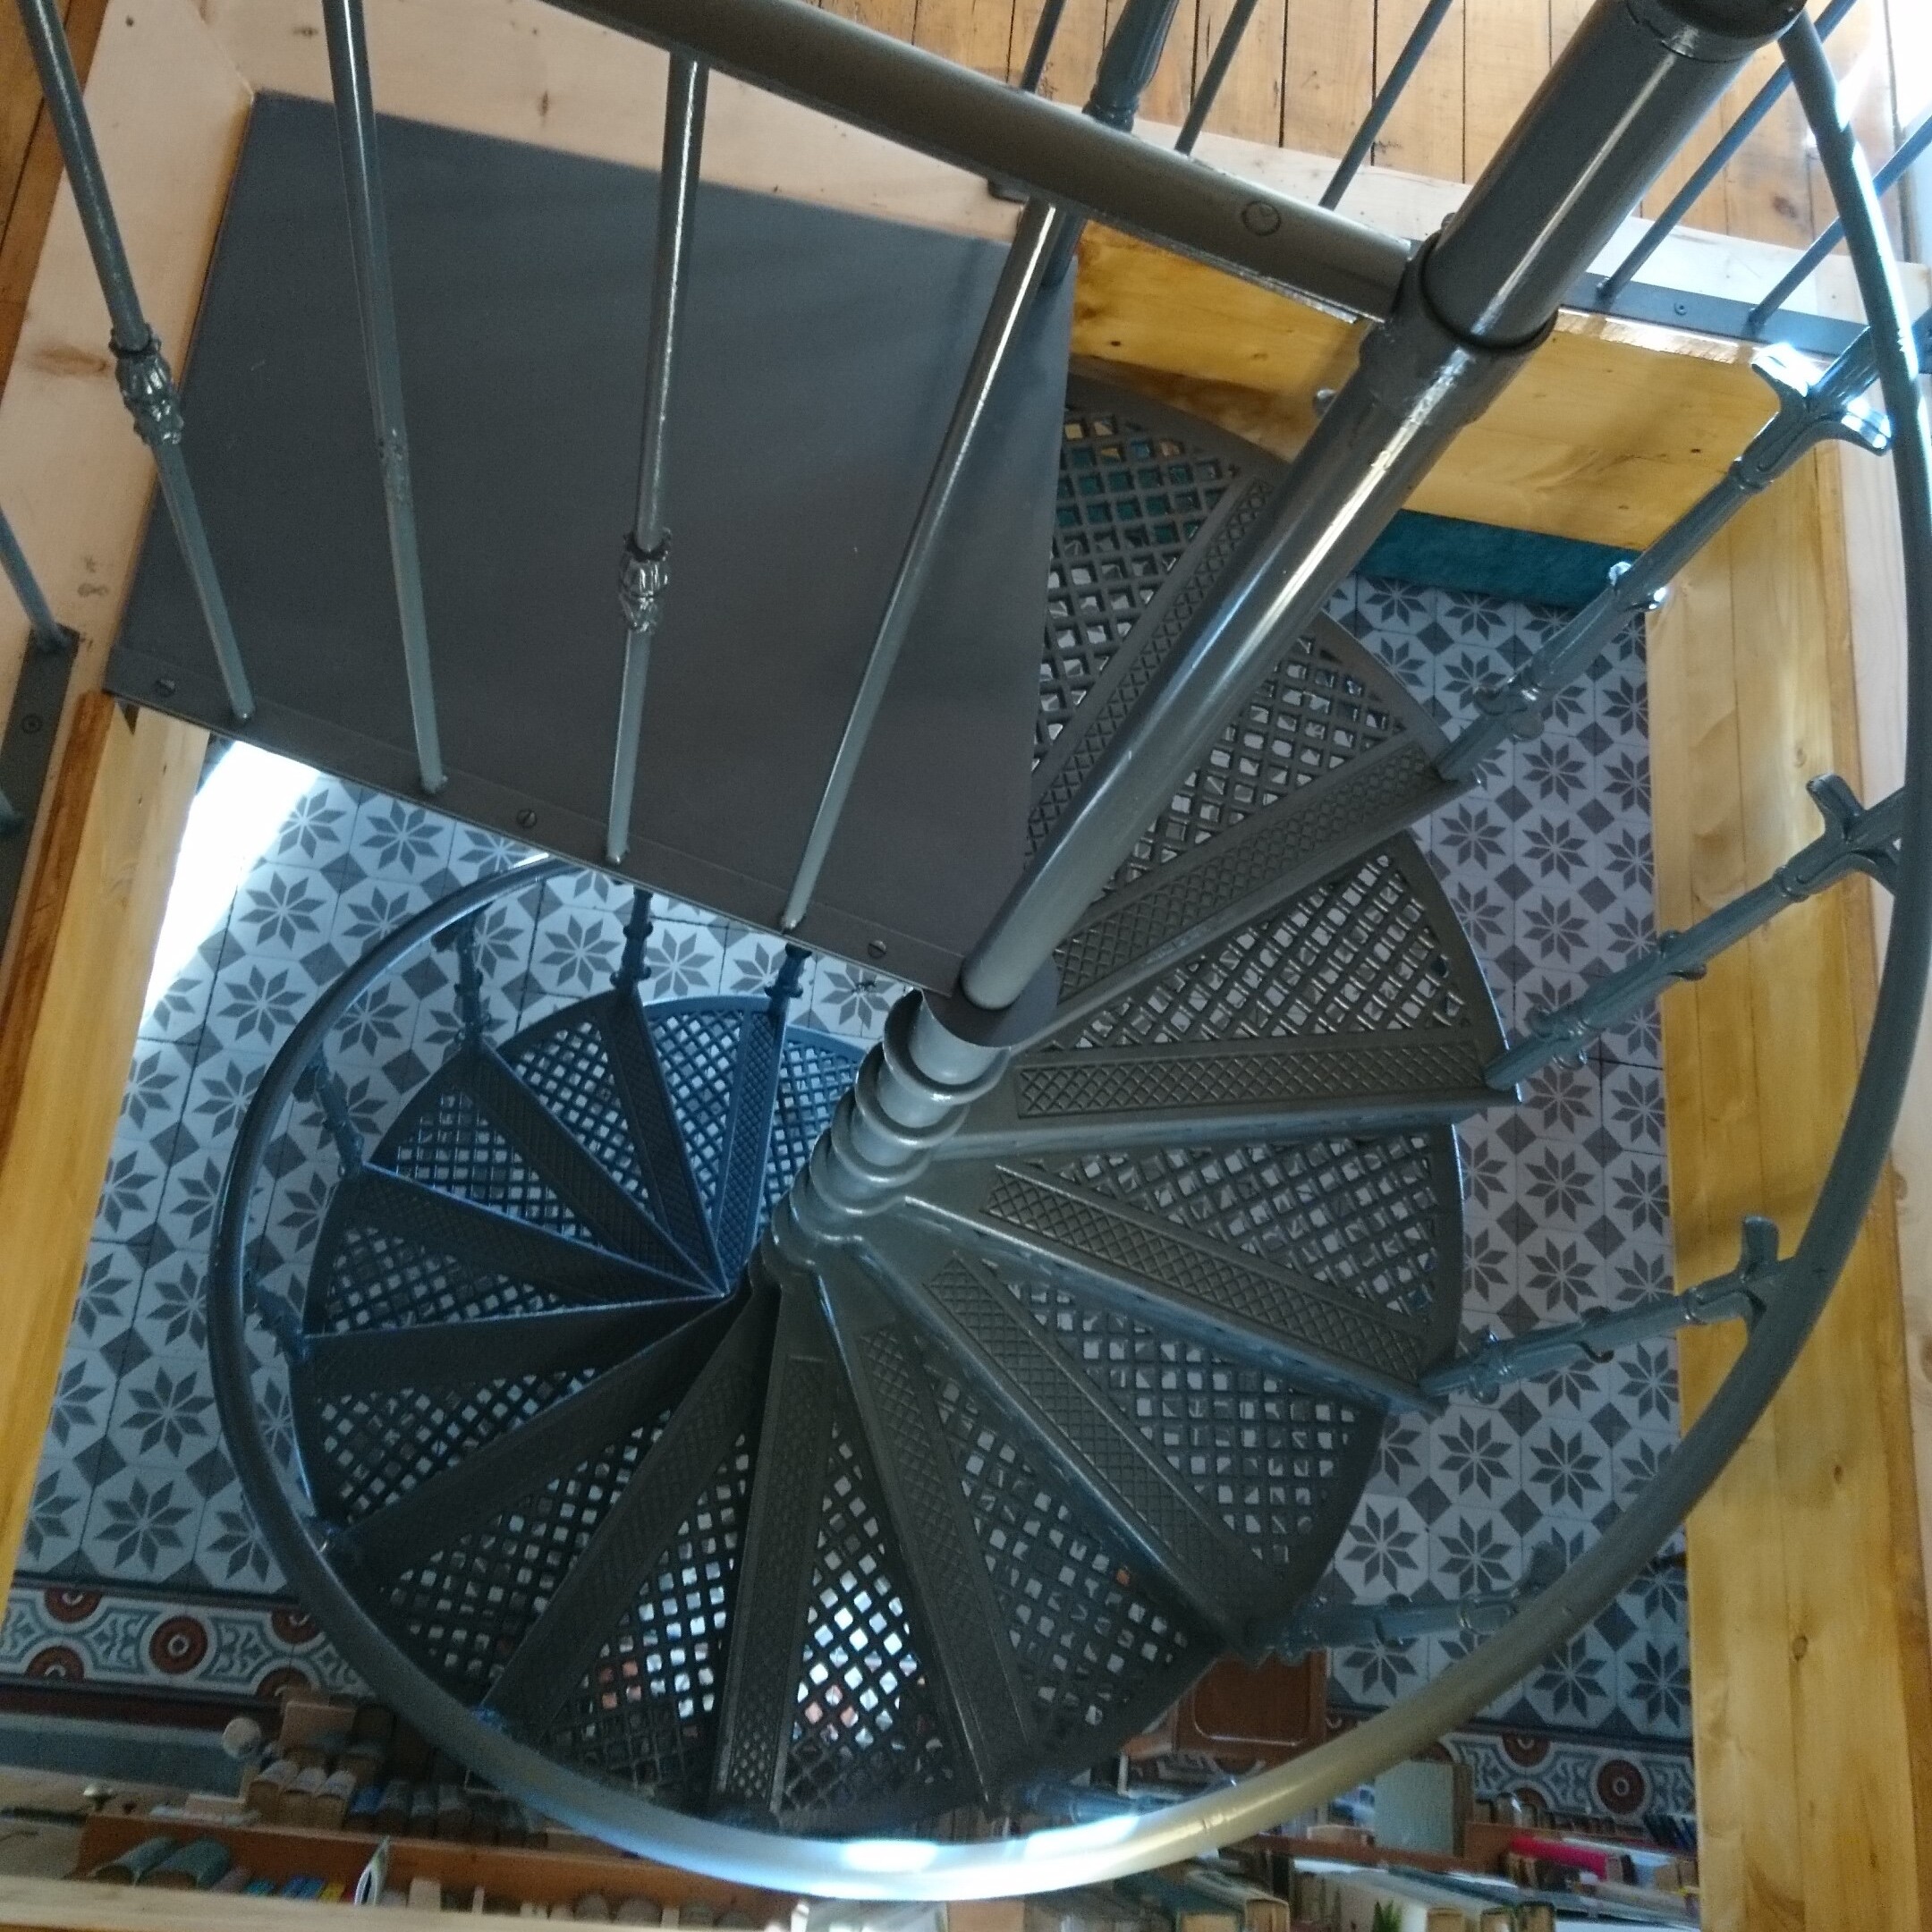 Cast iron spiral staircase model Tours in a square stairwell